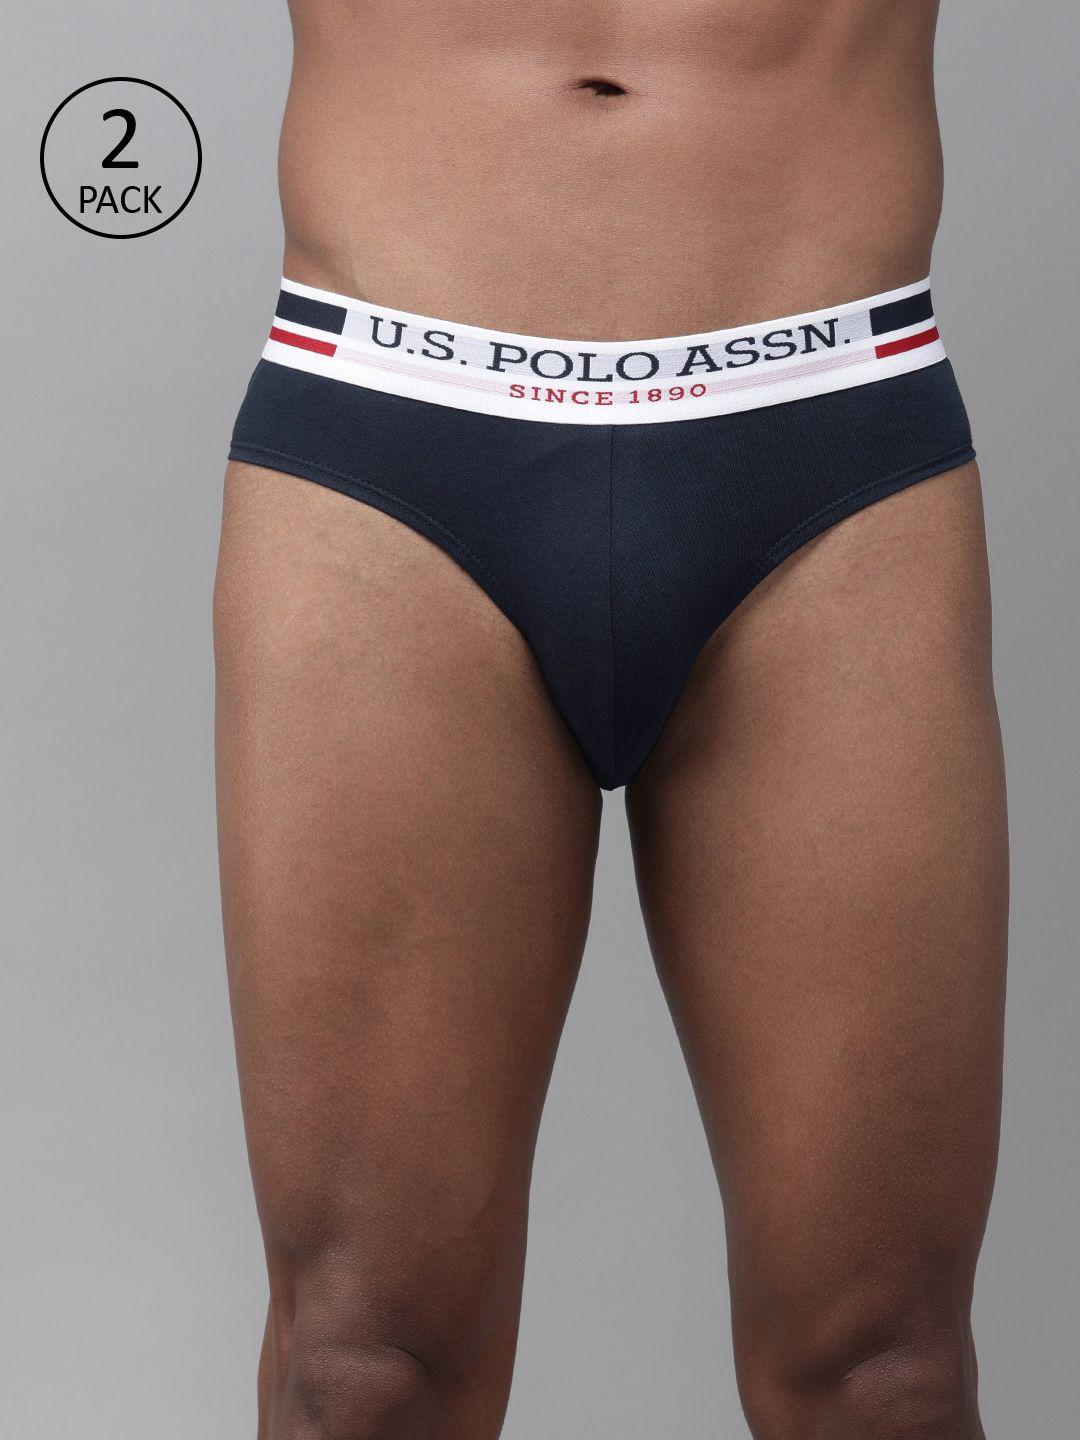 U.S. Polo Assn. Men Pack of 2 Navy Blue Solid Briefs Y9I006-195-P2